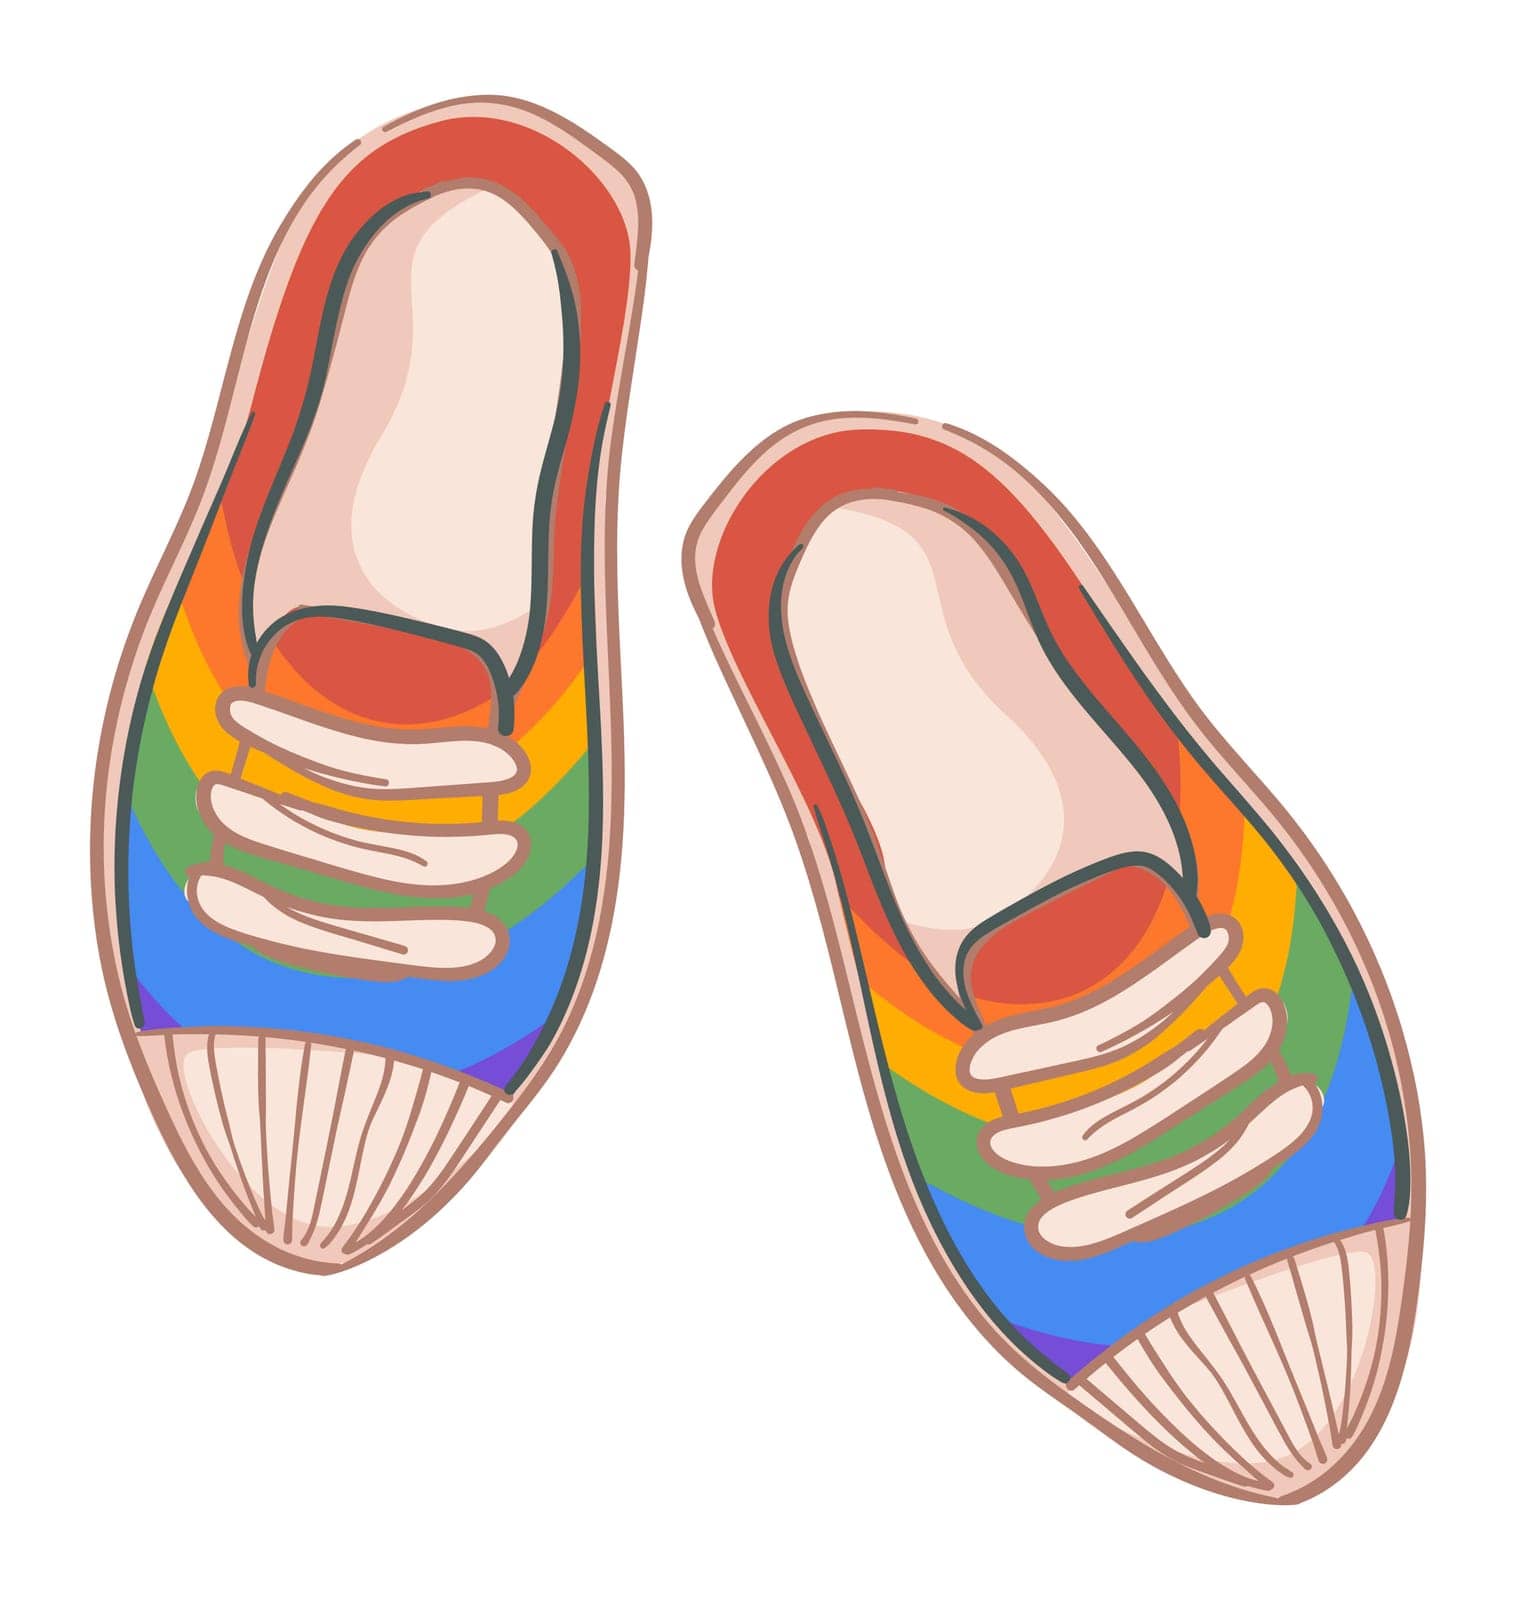 Shoes with rainbow for men or women boho style by Sonulkaster